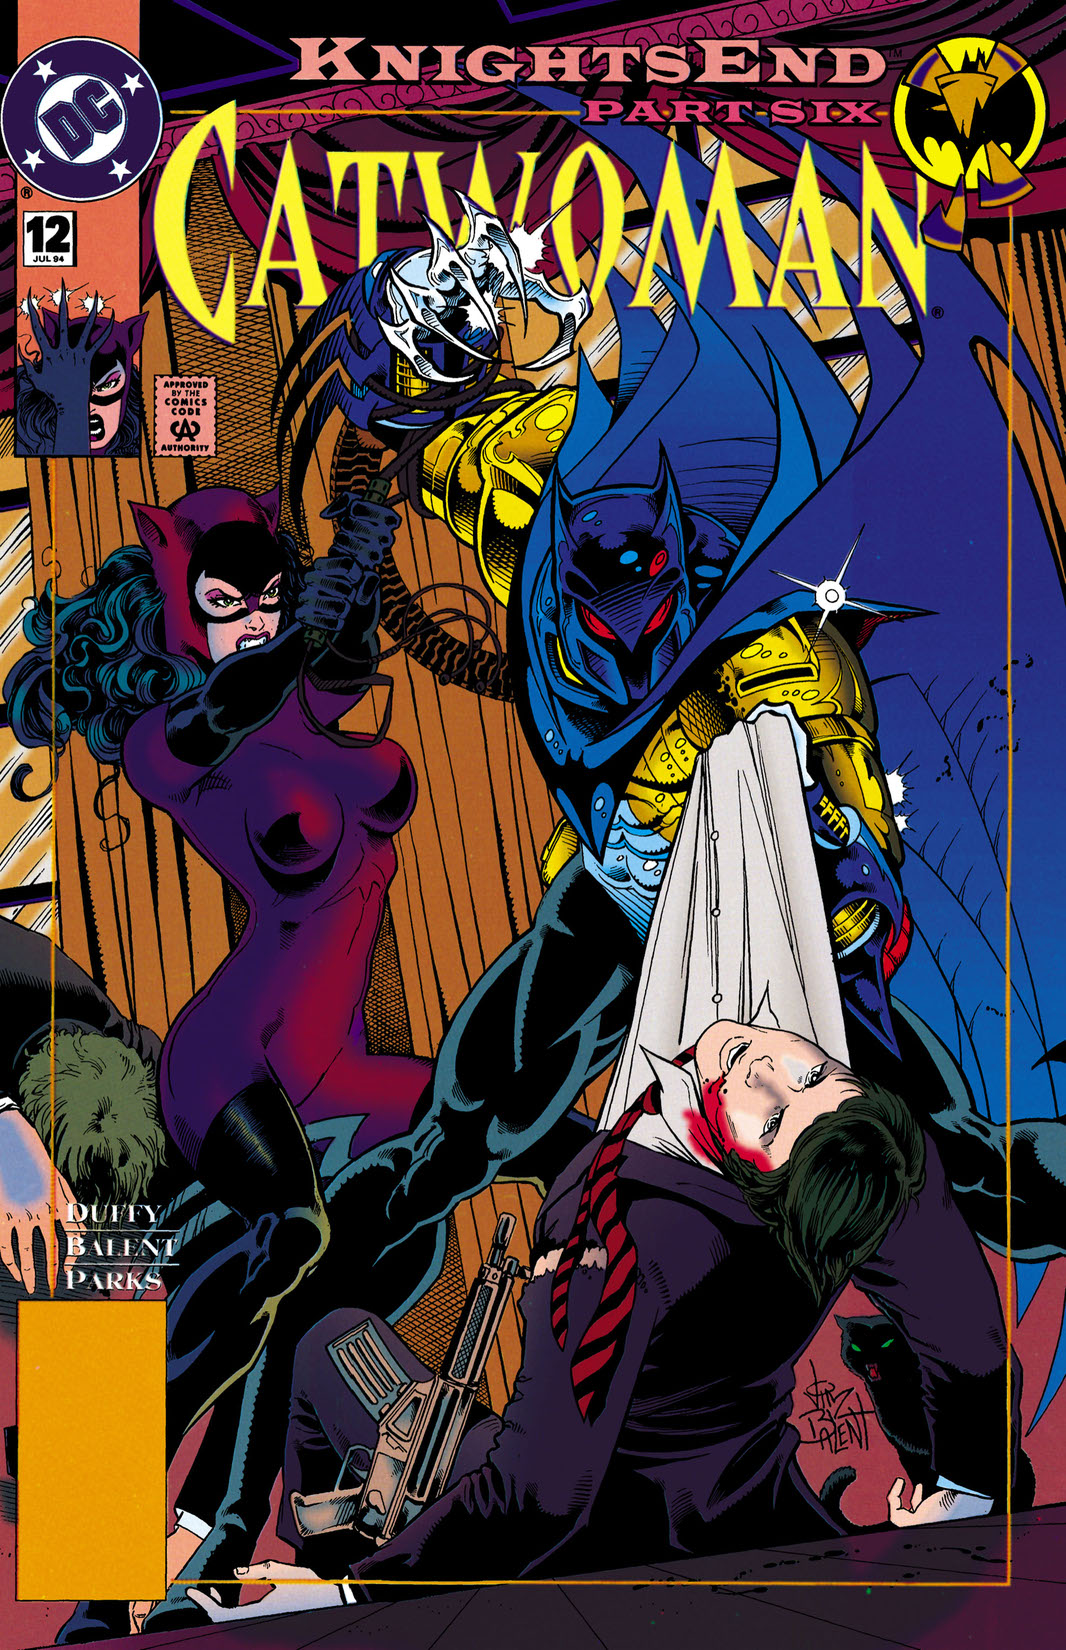 Catwoman (1993-) #12 preview images